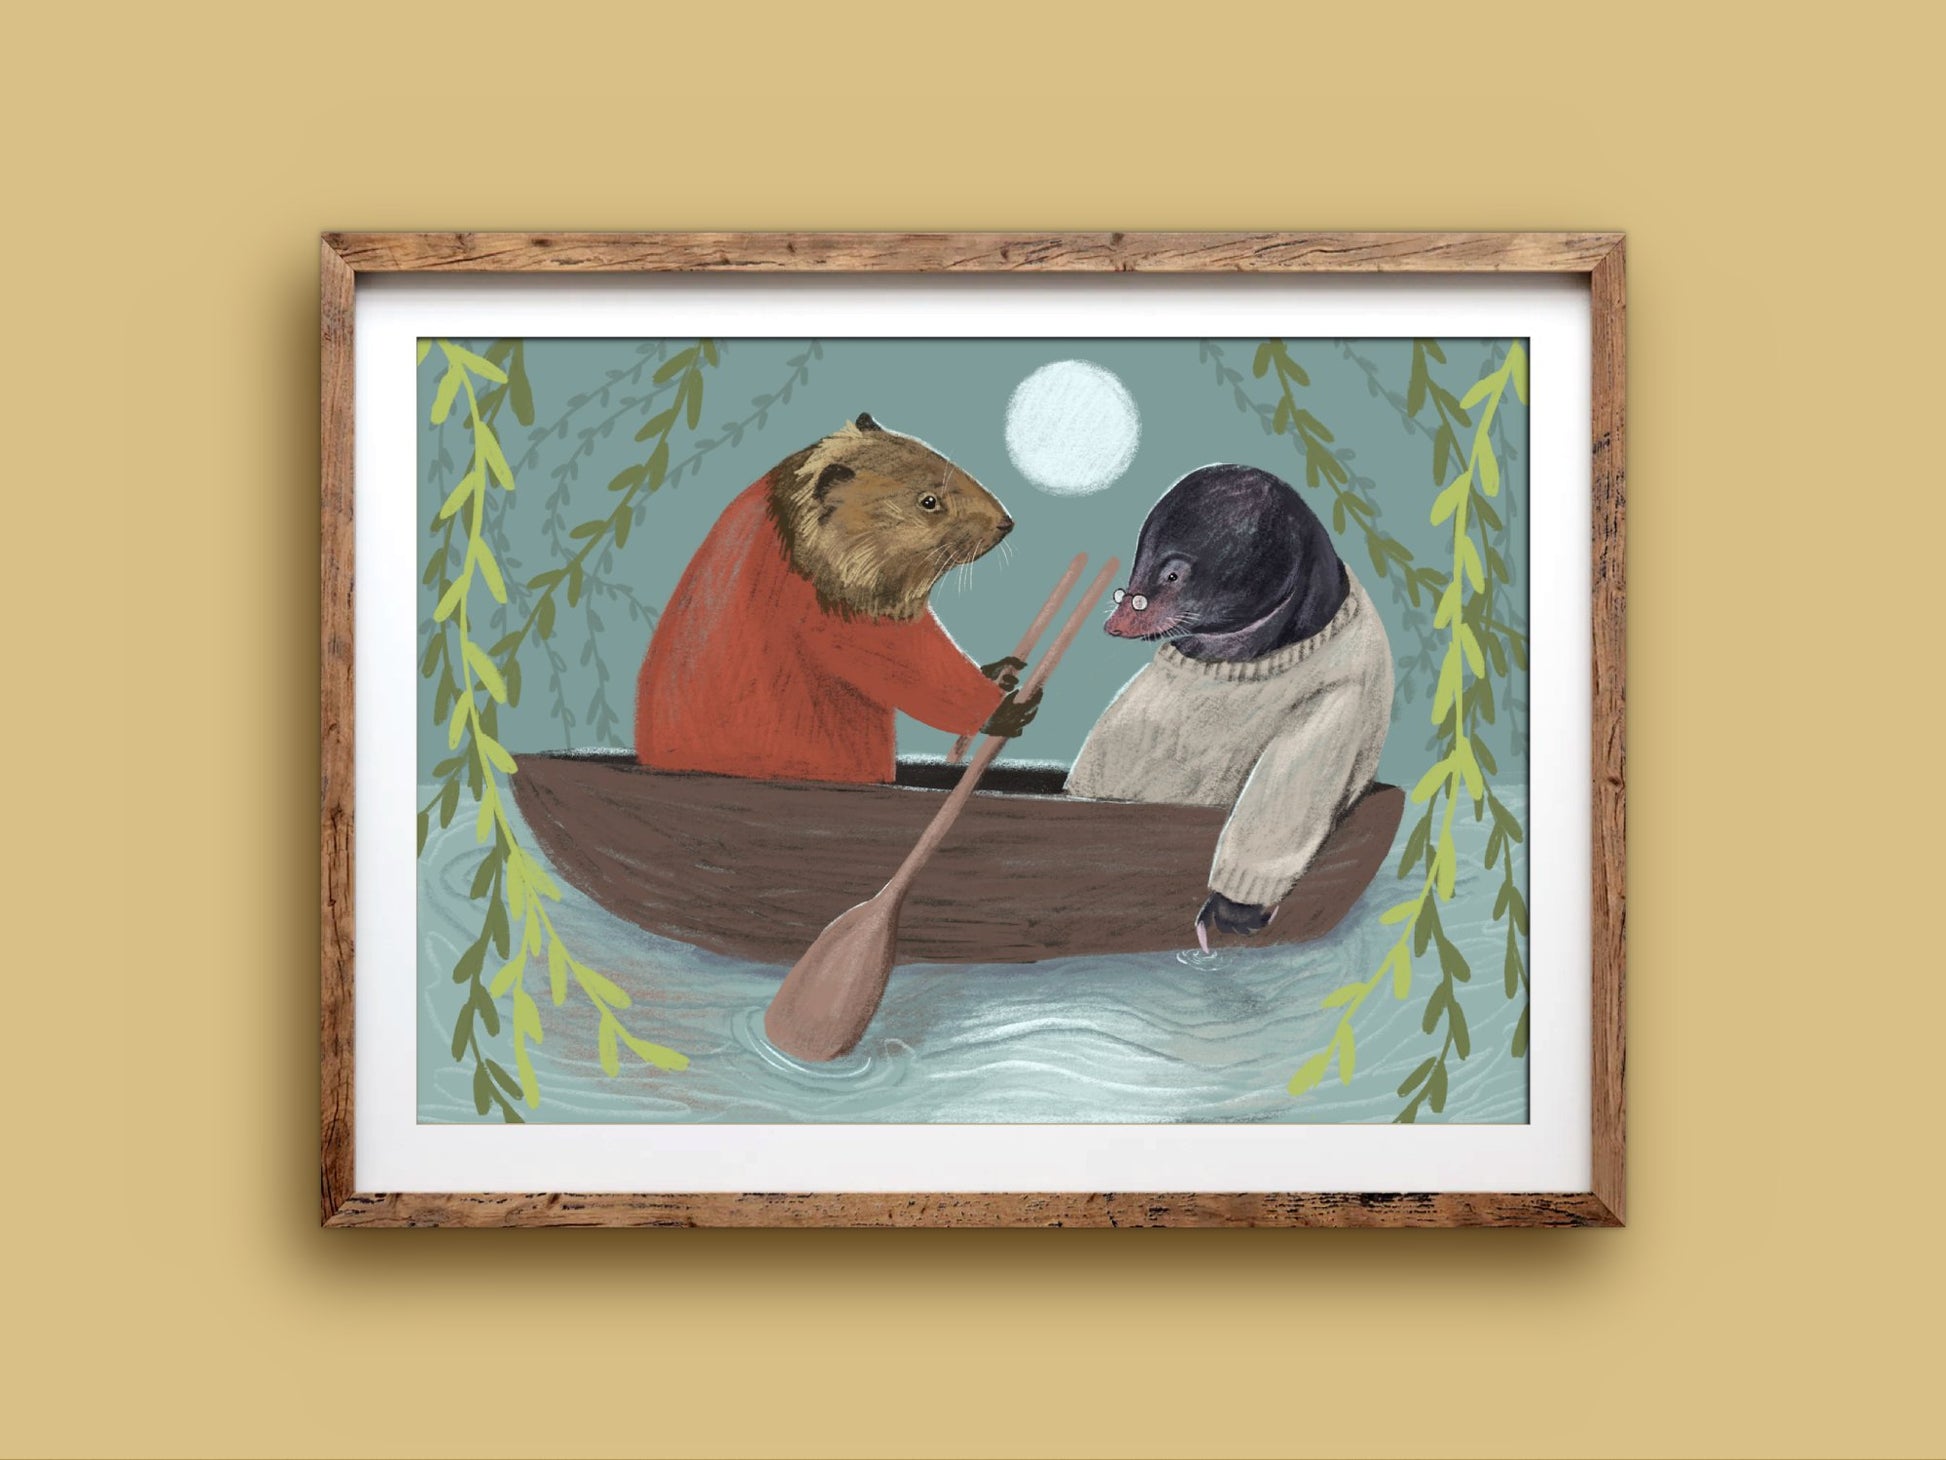 Anna Seed Art | Art Print - Wind in the Willows - Storybook illustration, wall art